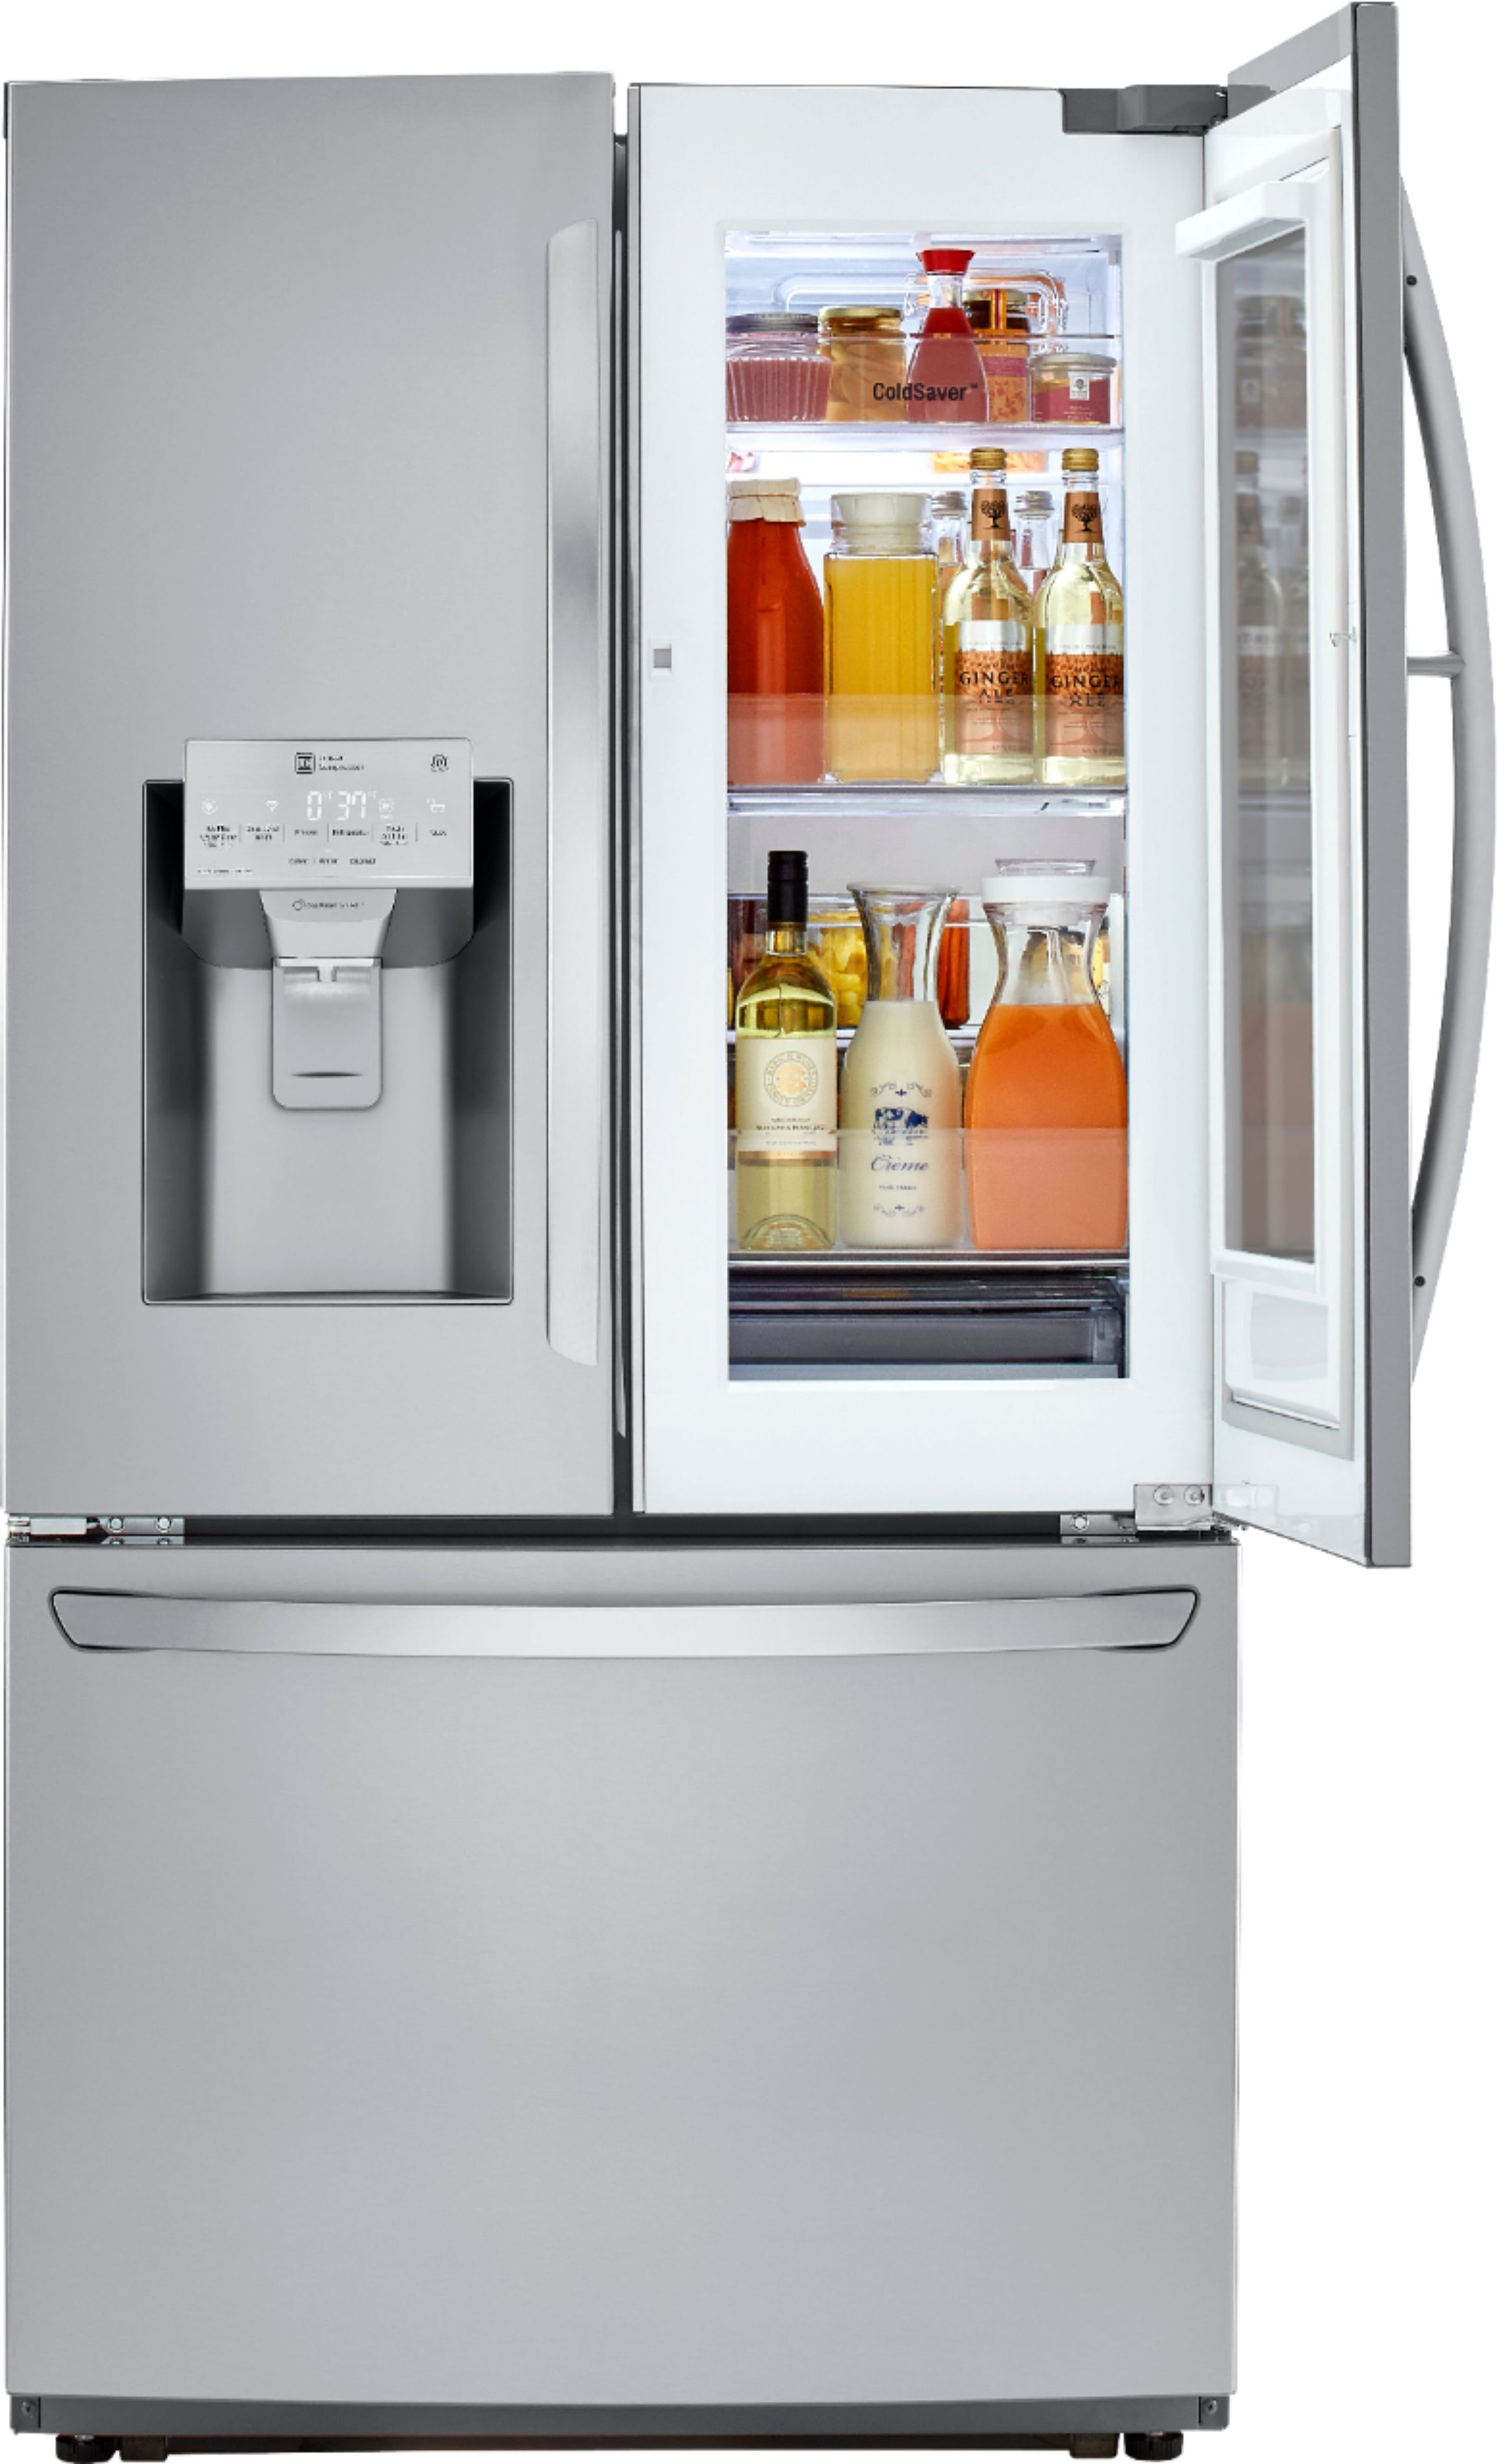 LG 26 Cu. Ft. French InstaView DoorinDoor Refrigerator with Wifi and Dual Ice Maker Stainless